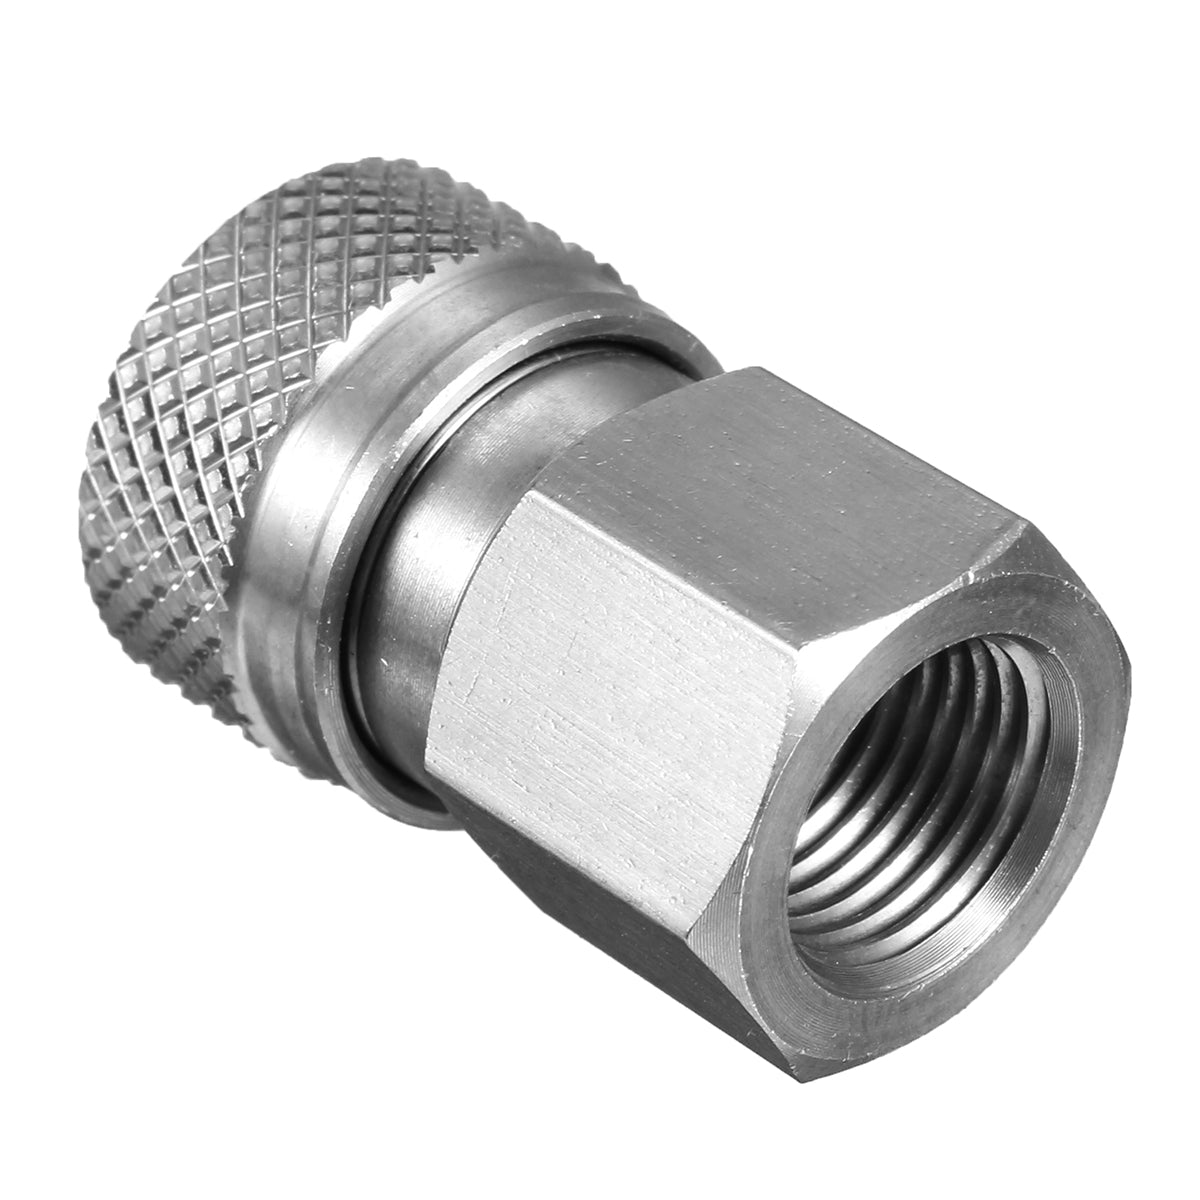 Lavender Paintball PCP 1/8 NPT Stainless Steel Female Connector Quick Disconnect Adapter